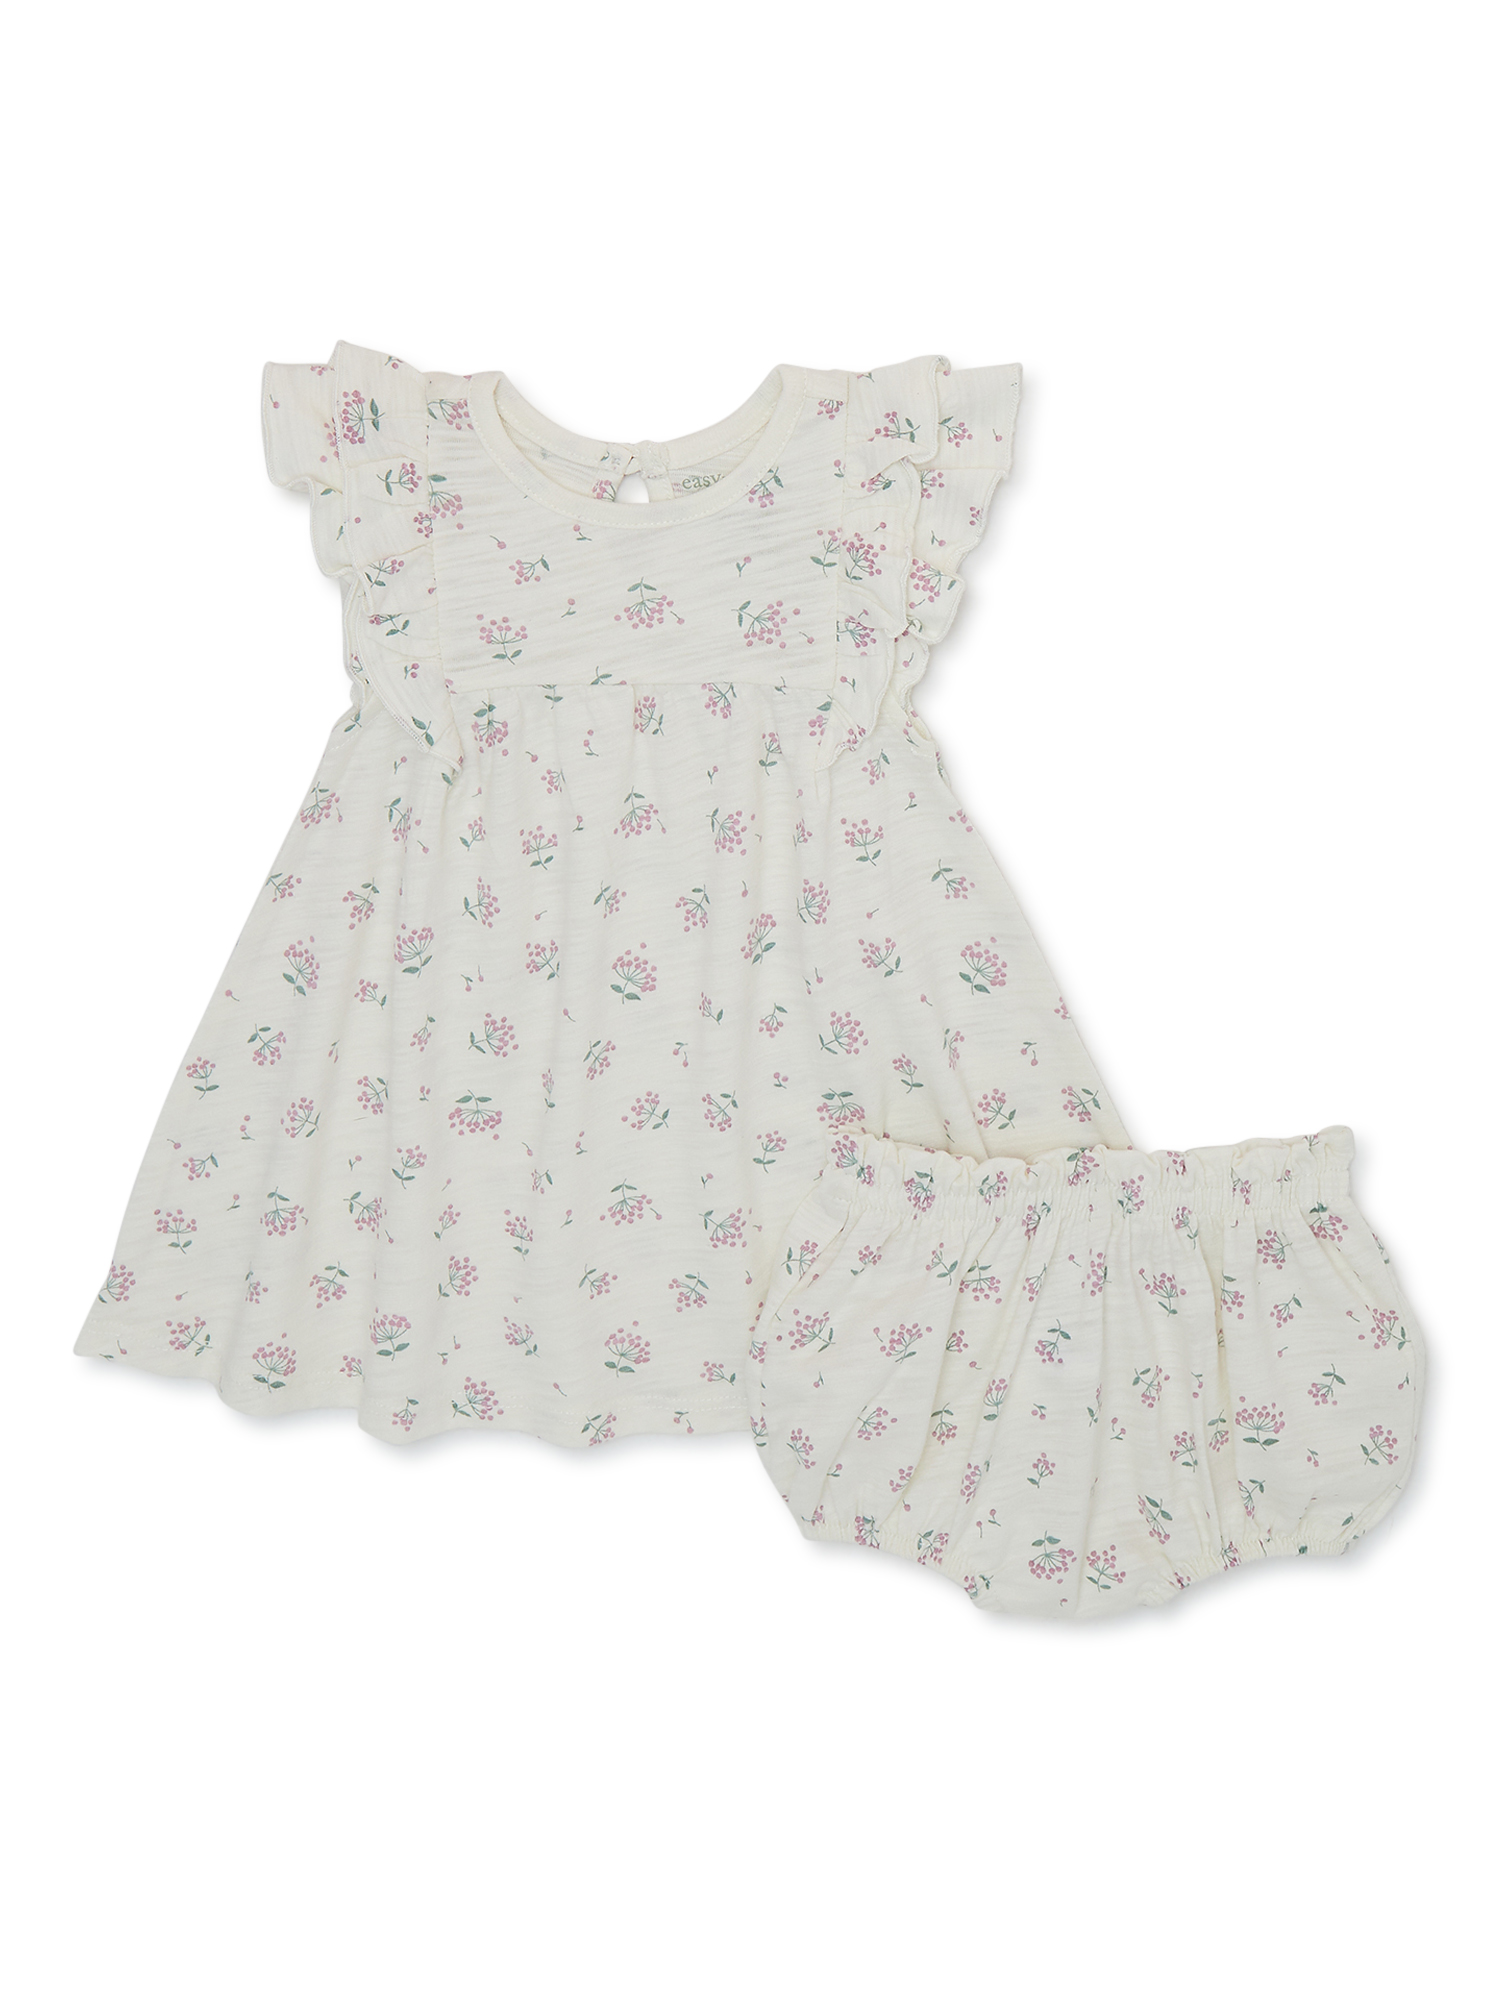 easy-peasy Baby Girls Print Dress and Diaper Cover, Sizes 0-24 Months - image 1 of 6